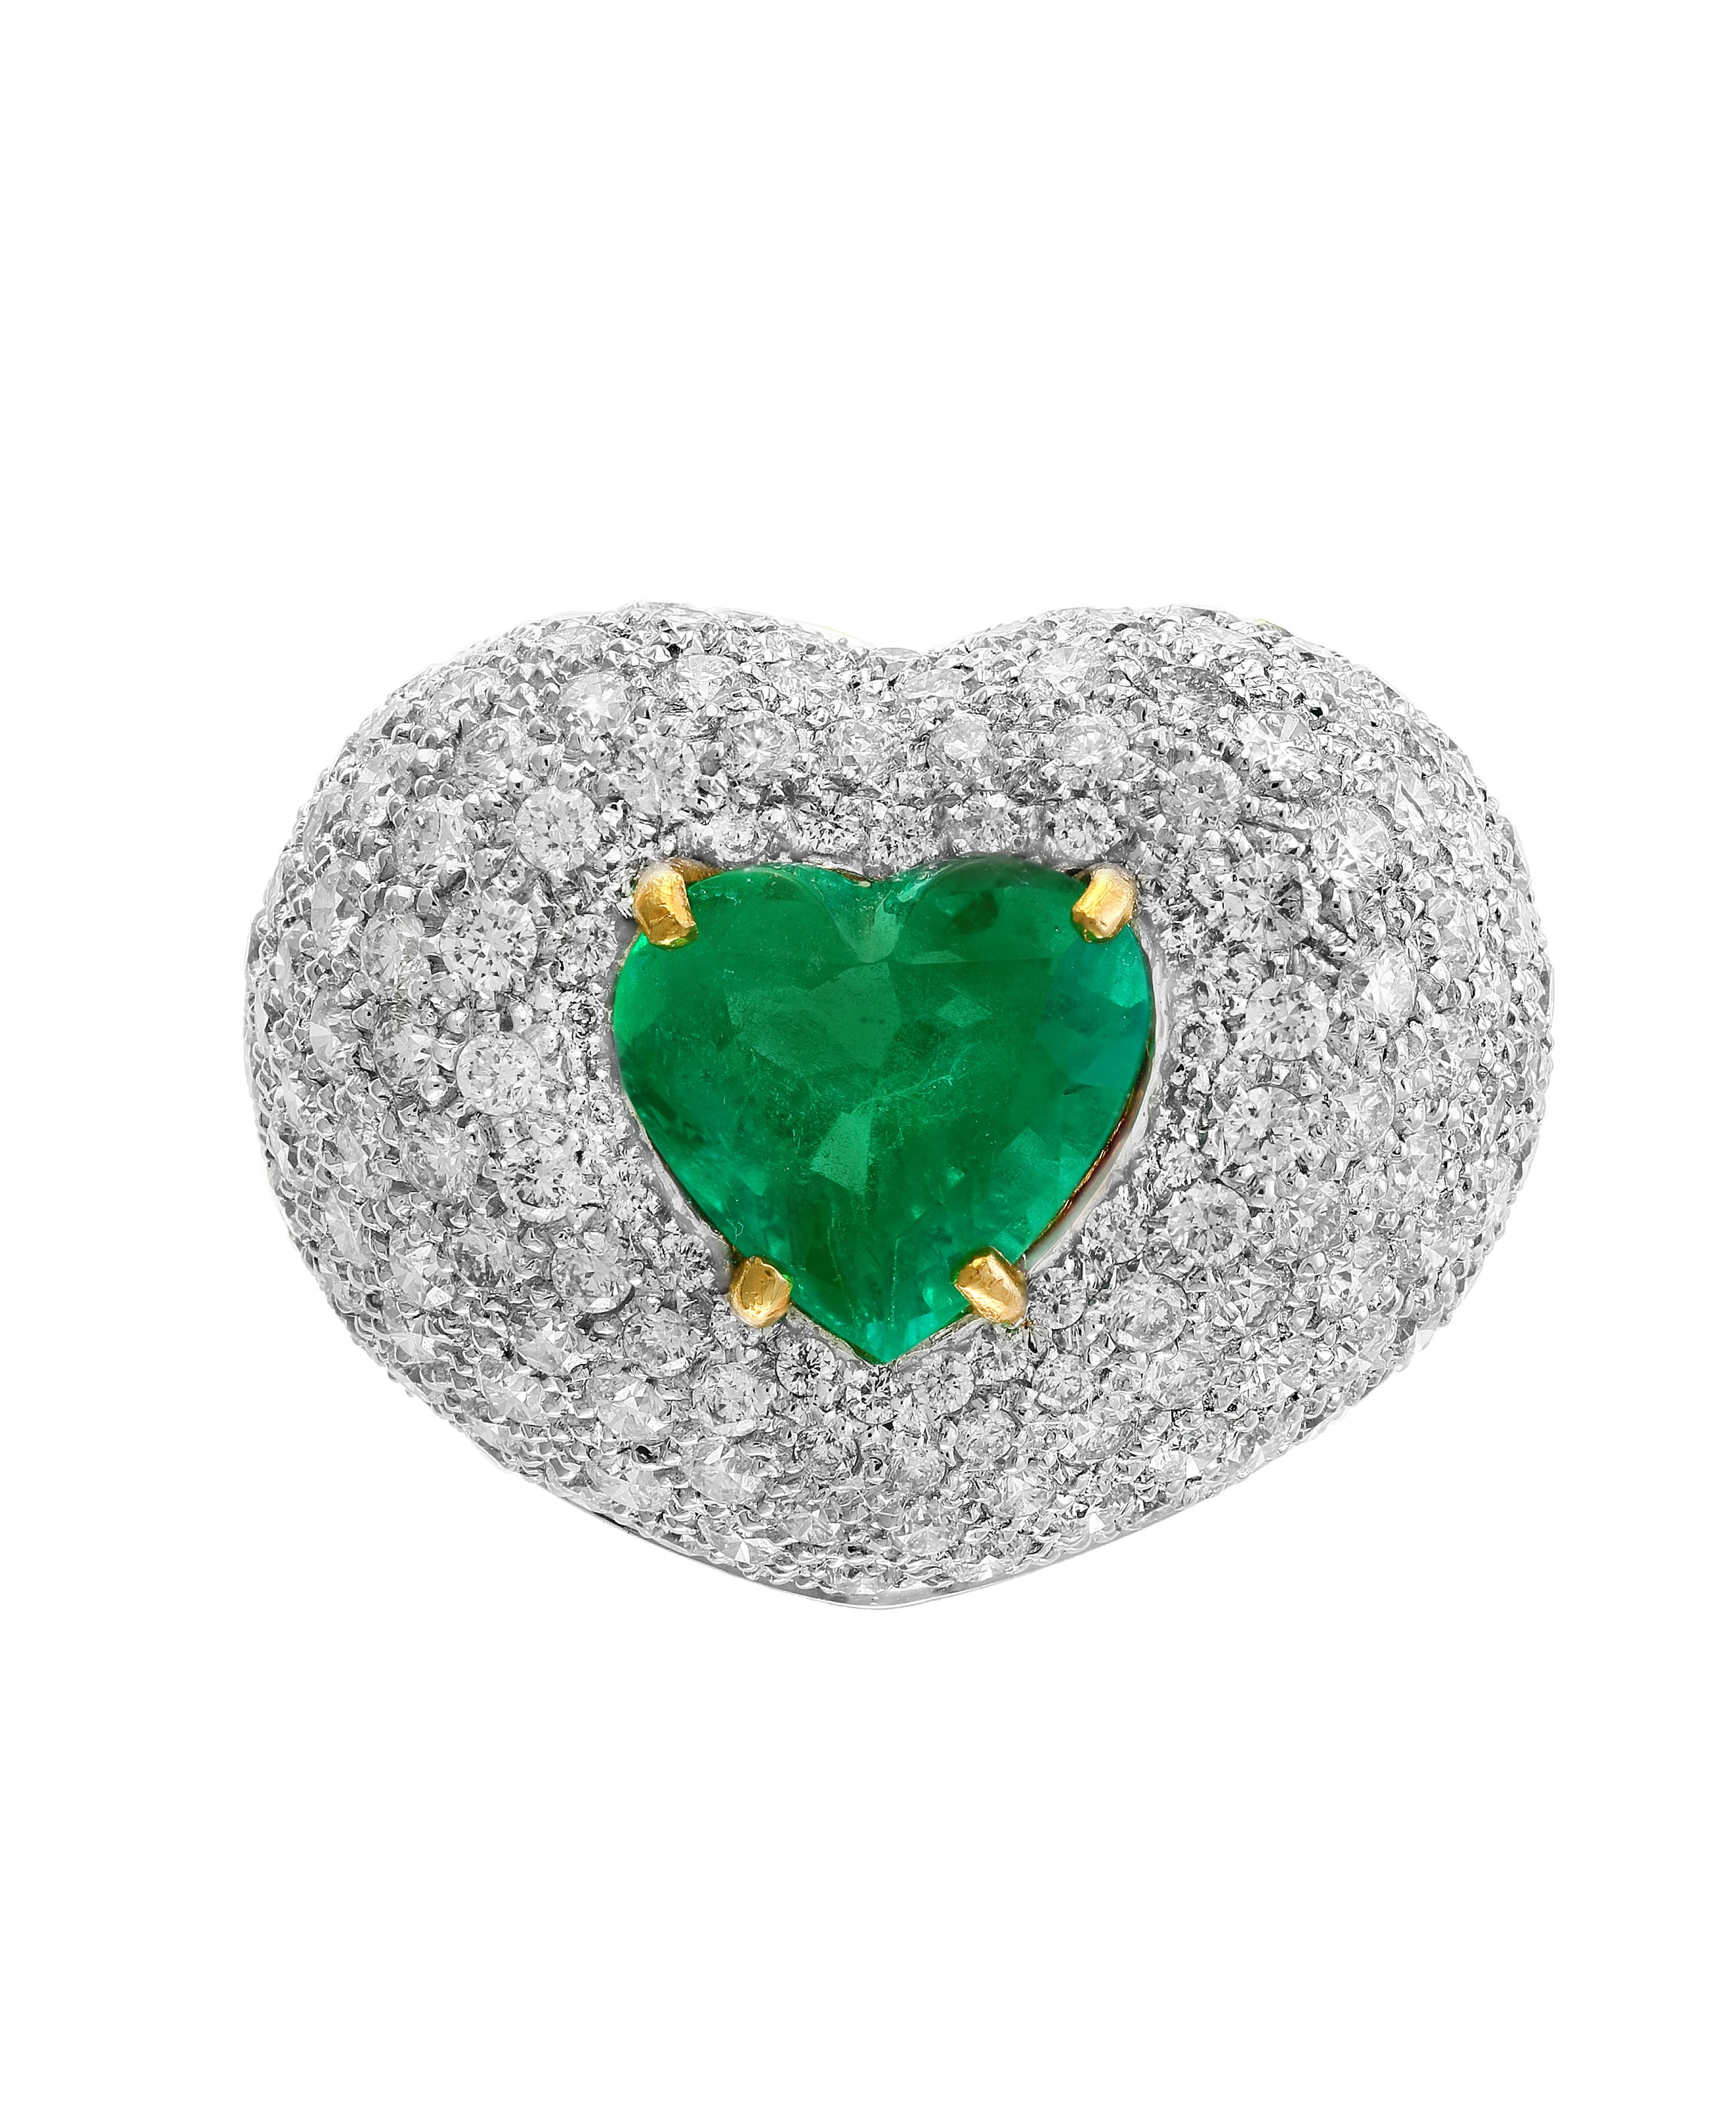 A classic, Cocktail ring 
3.5 Carat  Colombian Emerald and Diamond Ring, Estate with  no color enhancement.
Gold: 18 carat white gold , Weight: 16 gram Size of the ring 6.5
 Diamonds: approximate 7.5 Carat Round brilliant  cut diamonds
Emerald: 